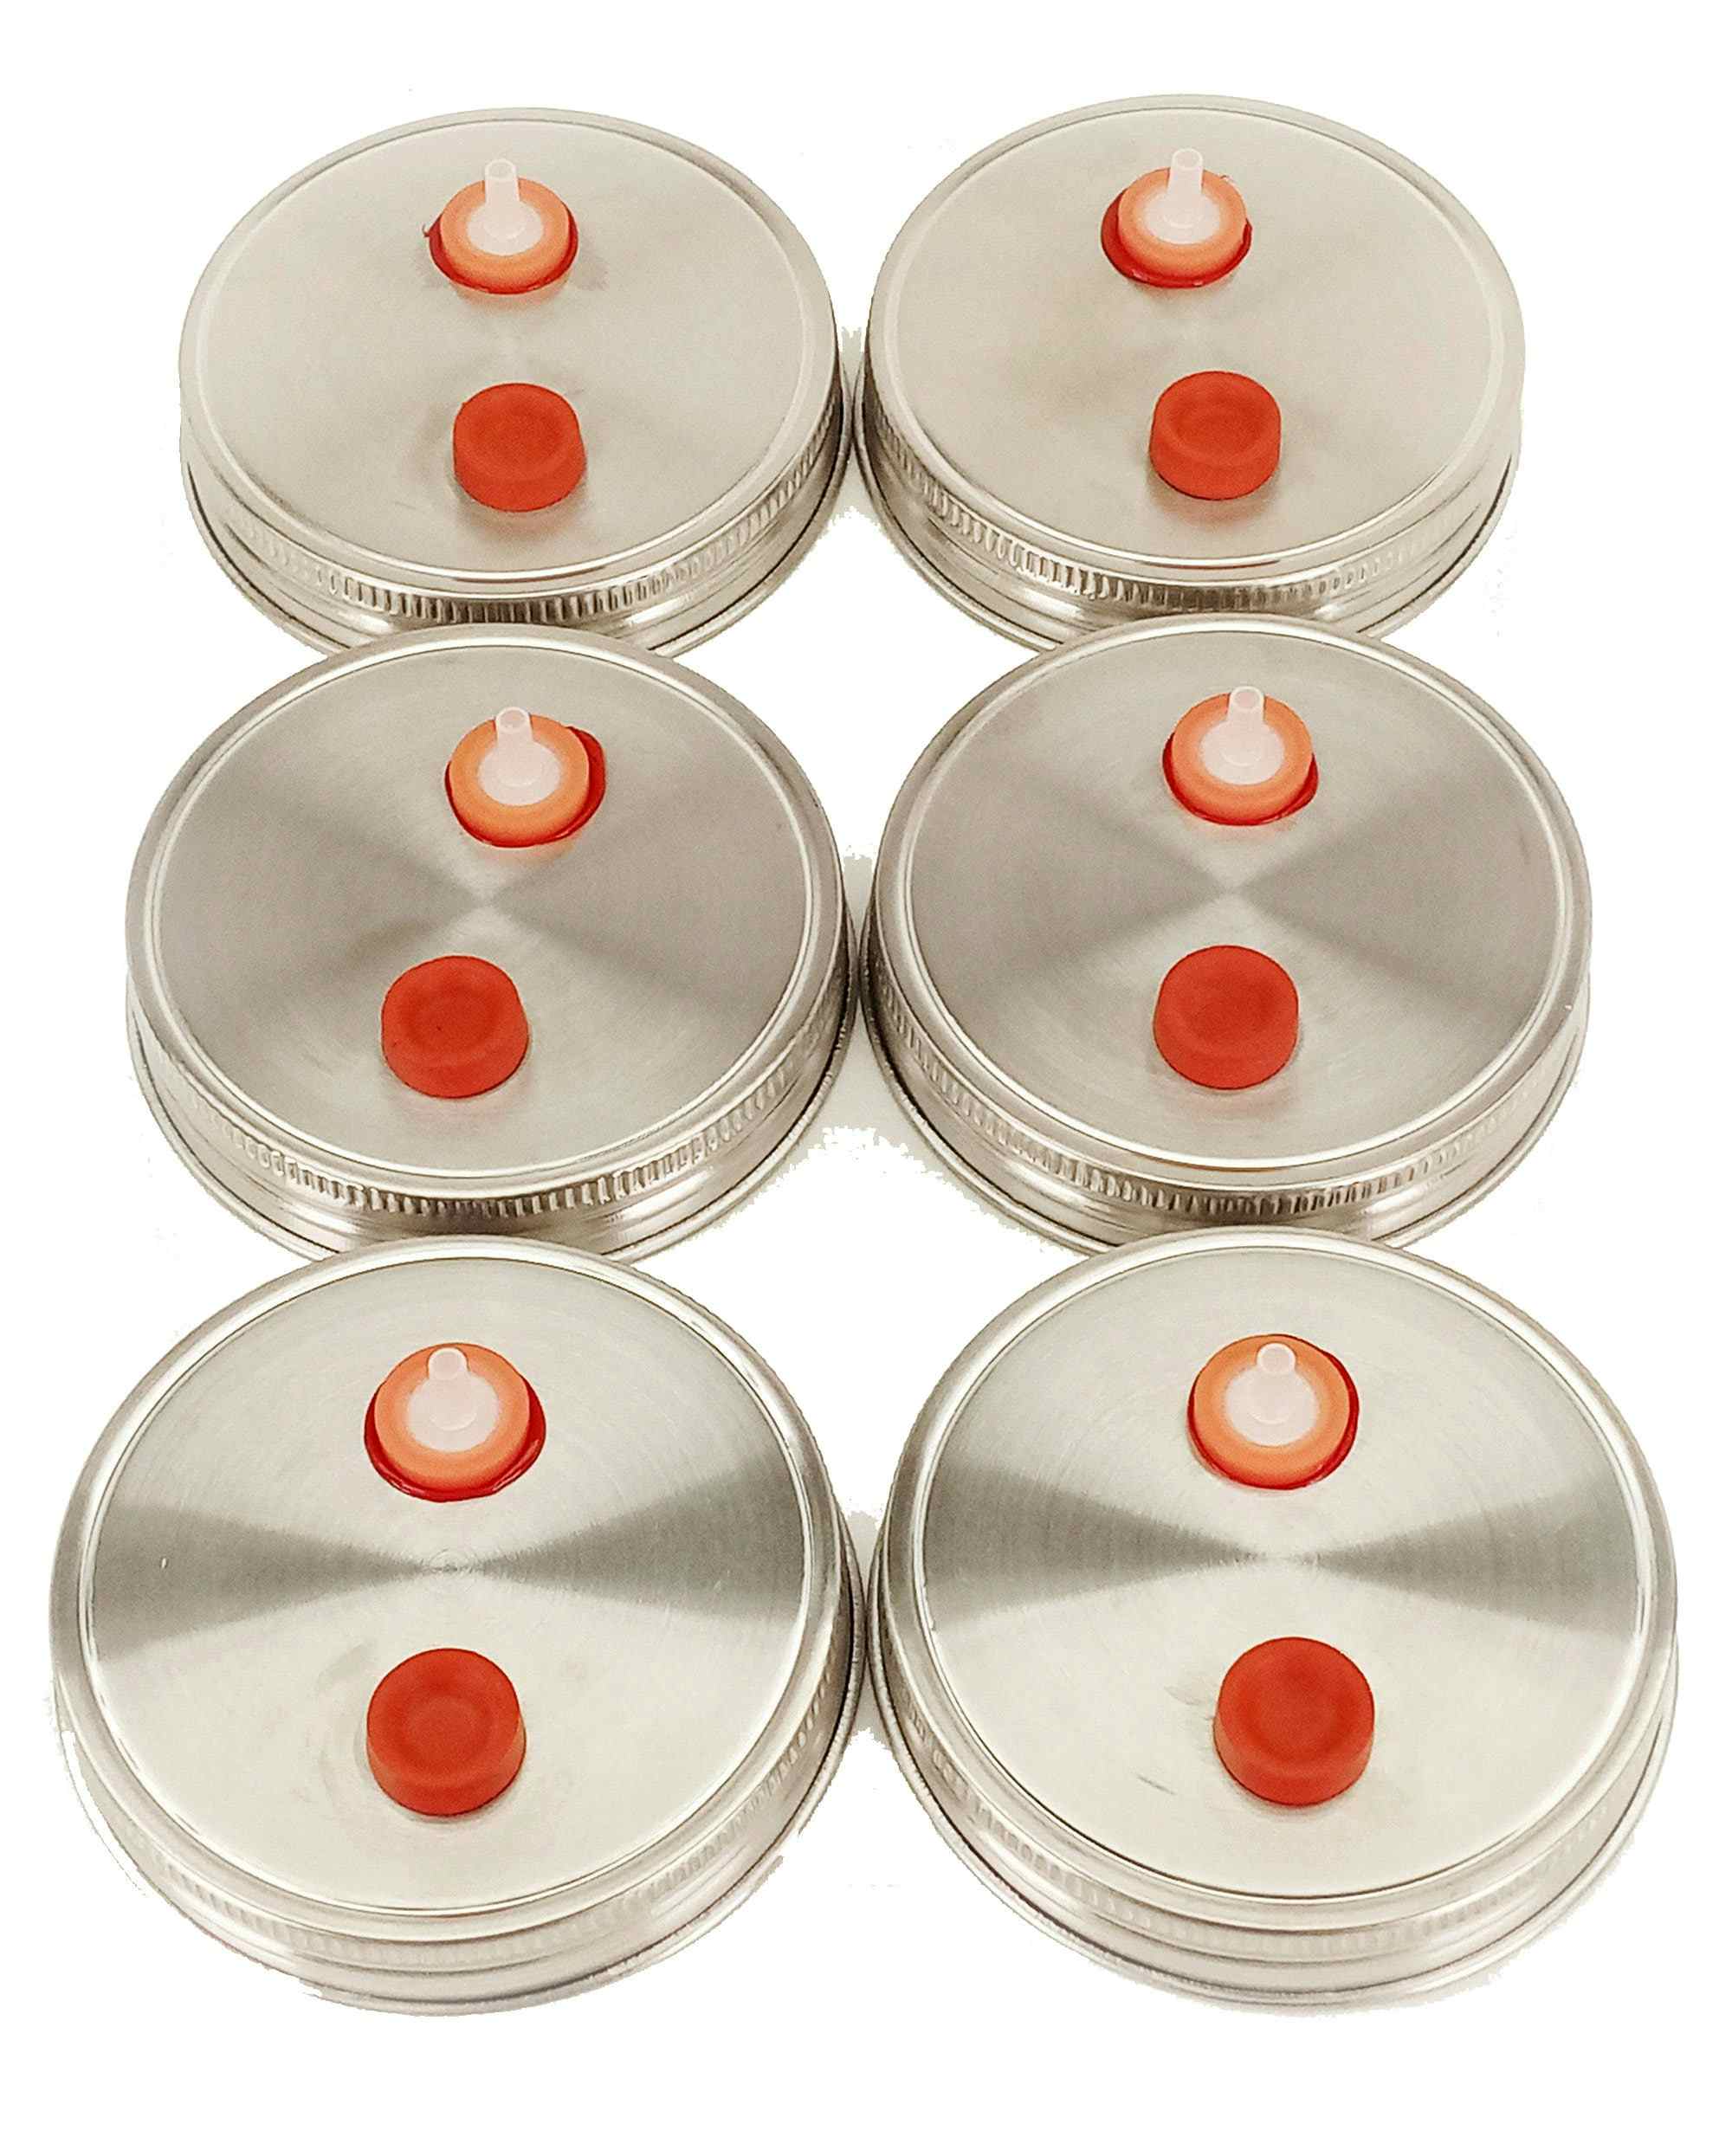 6 Stainless Steel Liquid Culture Jar Lids - AirPort Wide Mouth Metal Rust Proof